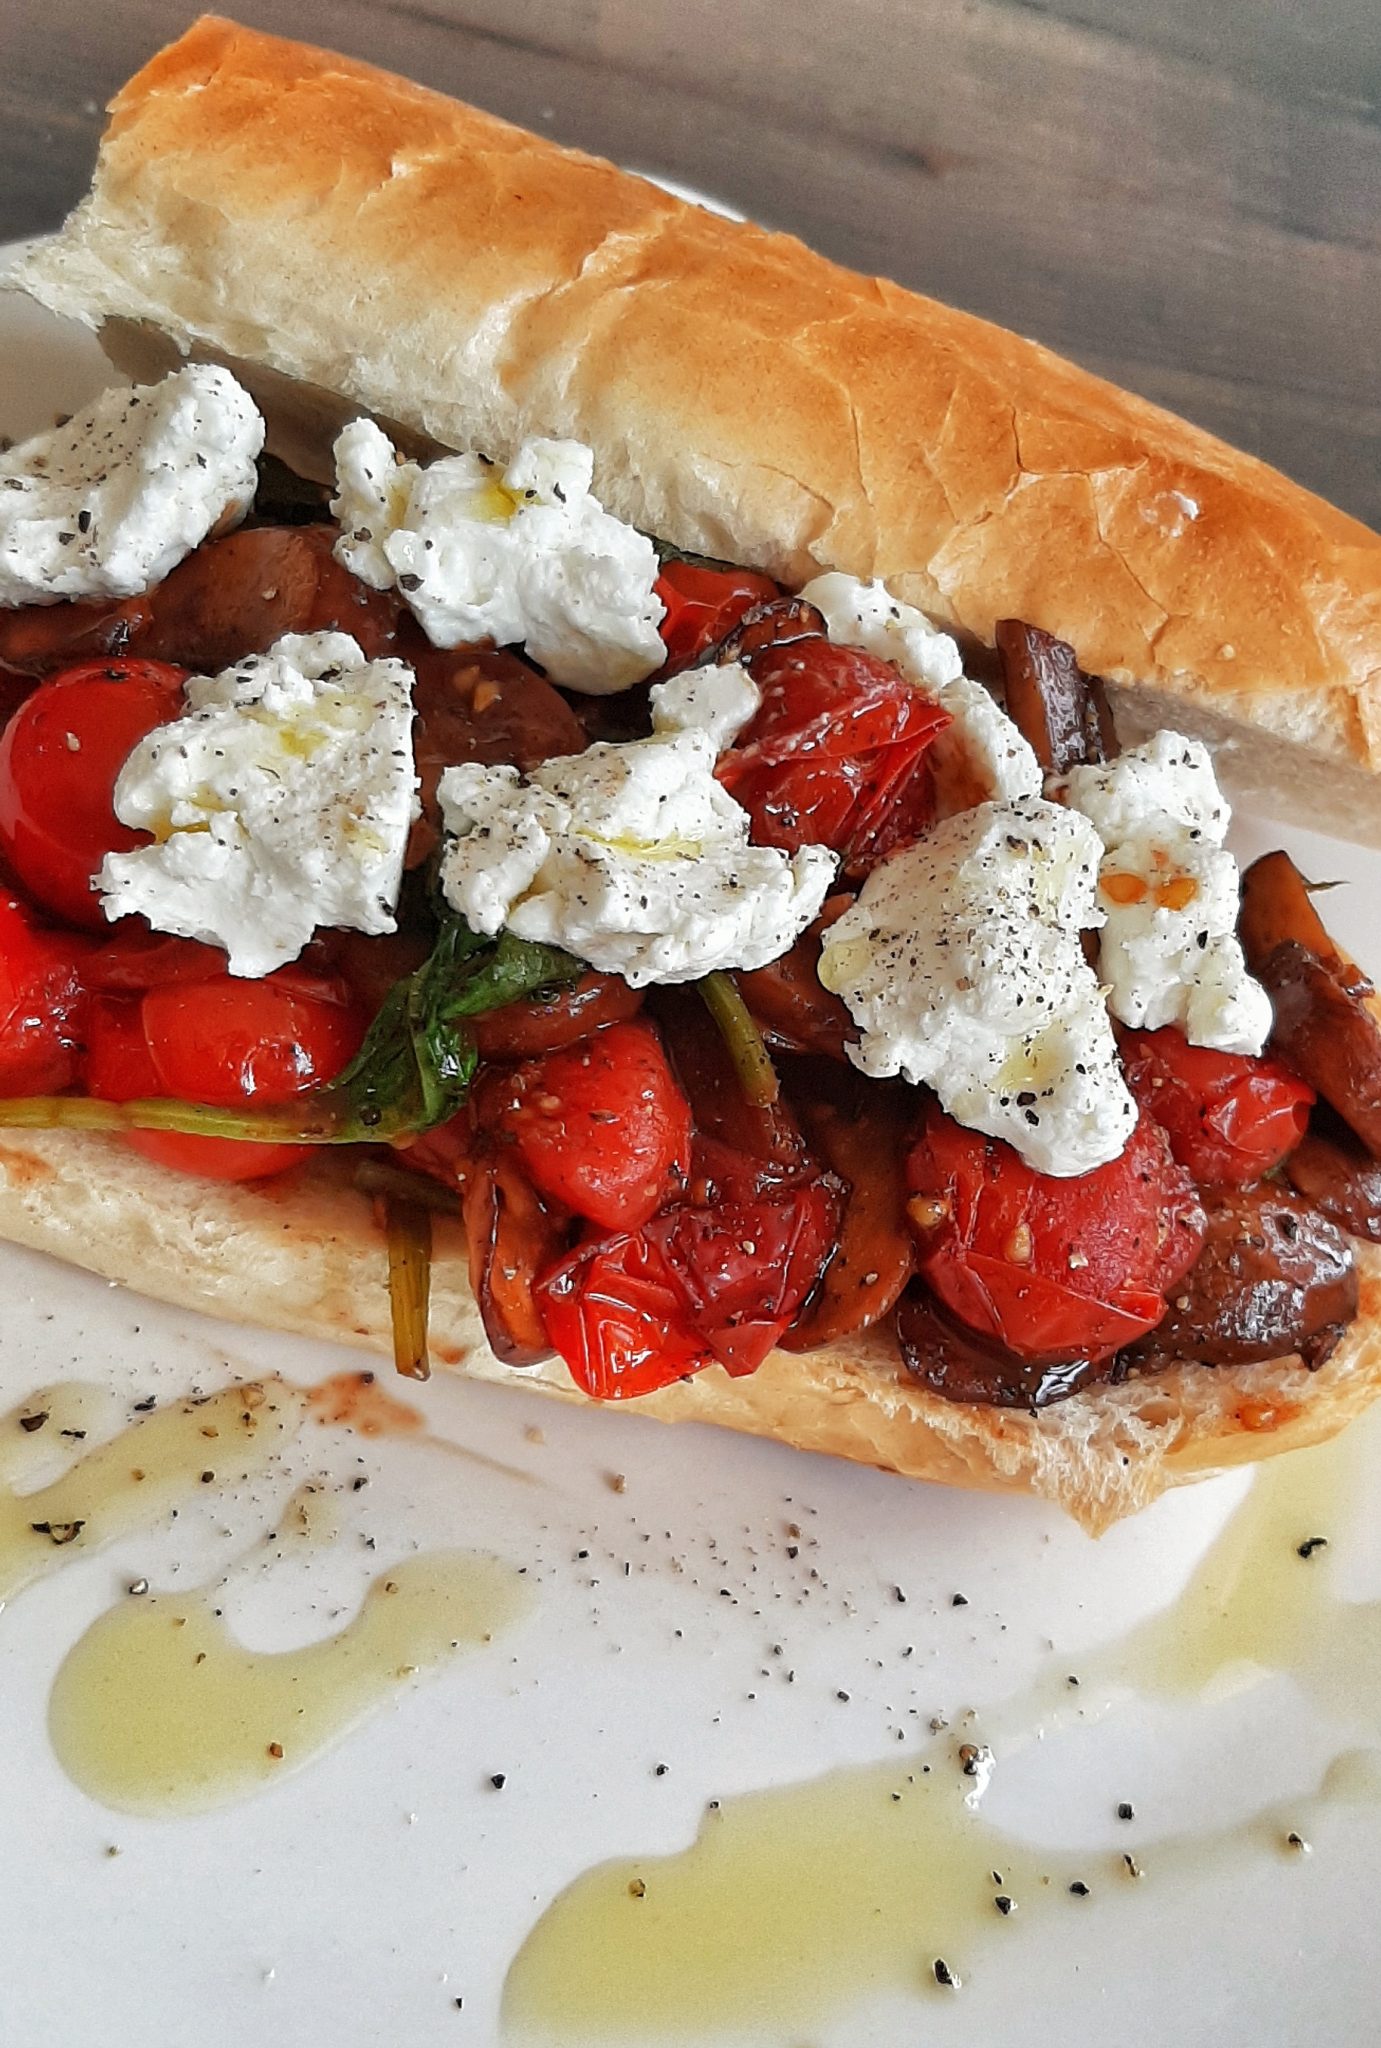 Balsamic Glazed Mushroom and Tomato Sandwich – THE PERFECTLY IMPERFECT LIFE